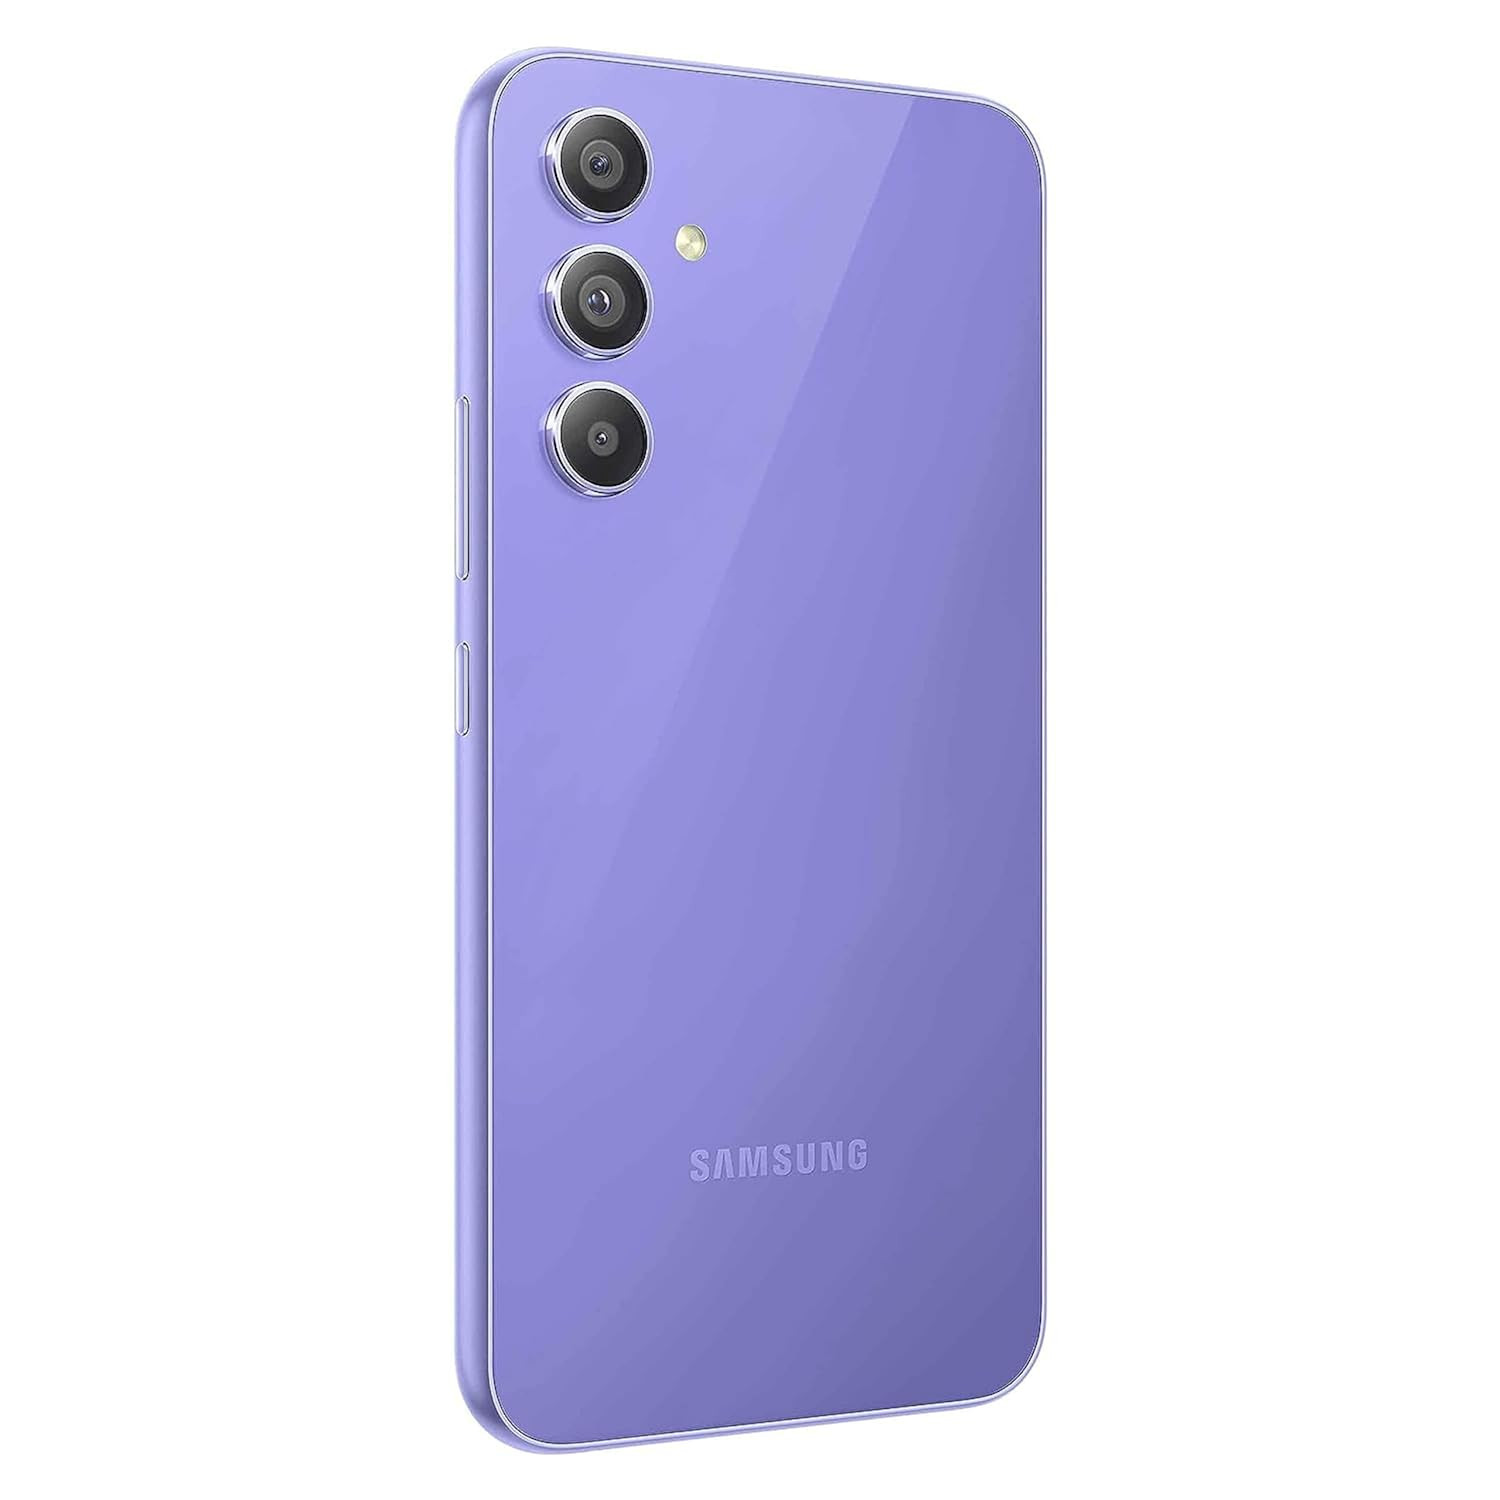 Samsung Galaxy A54 5G (Awesome Violet, 8GB, 256GB Storage) Without Offer